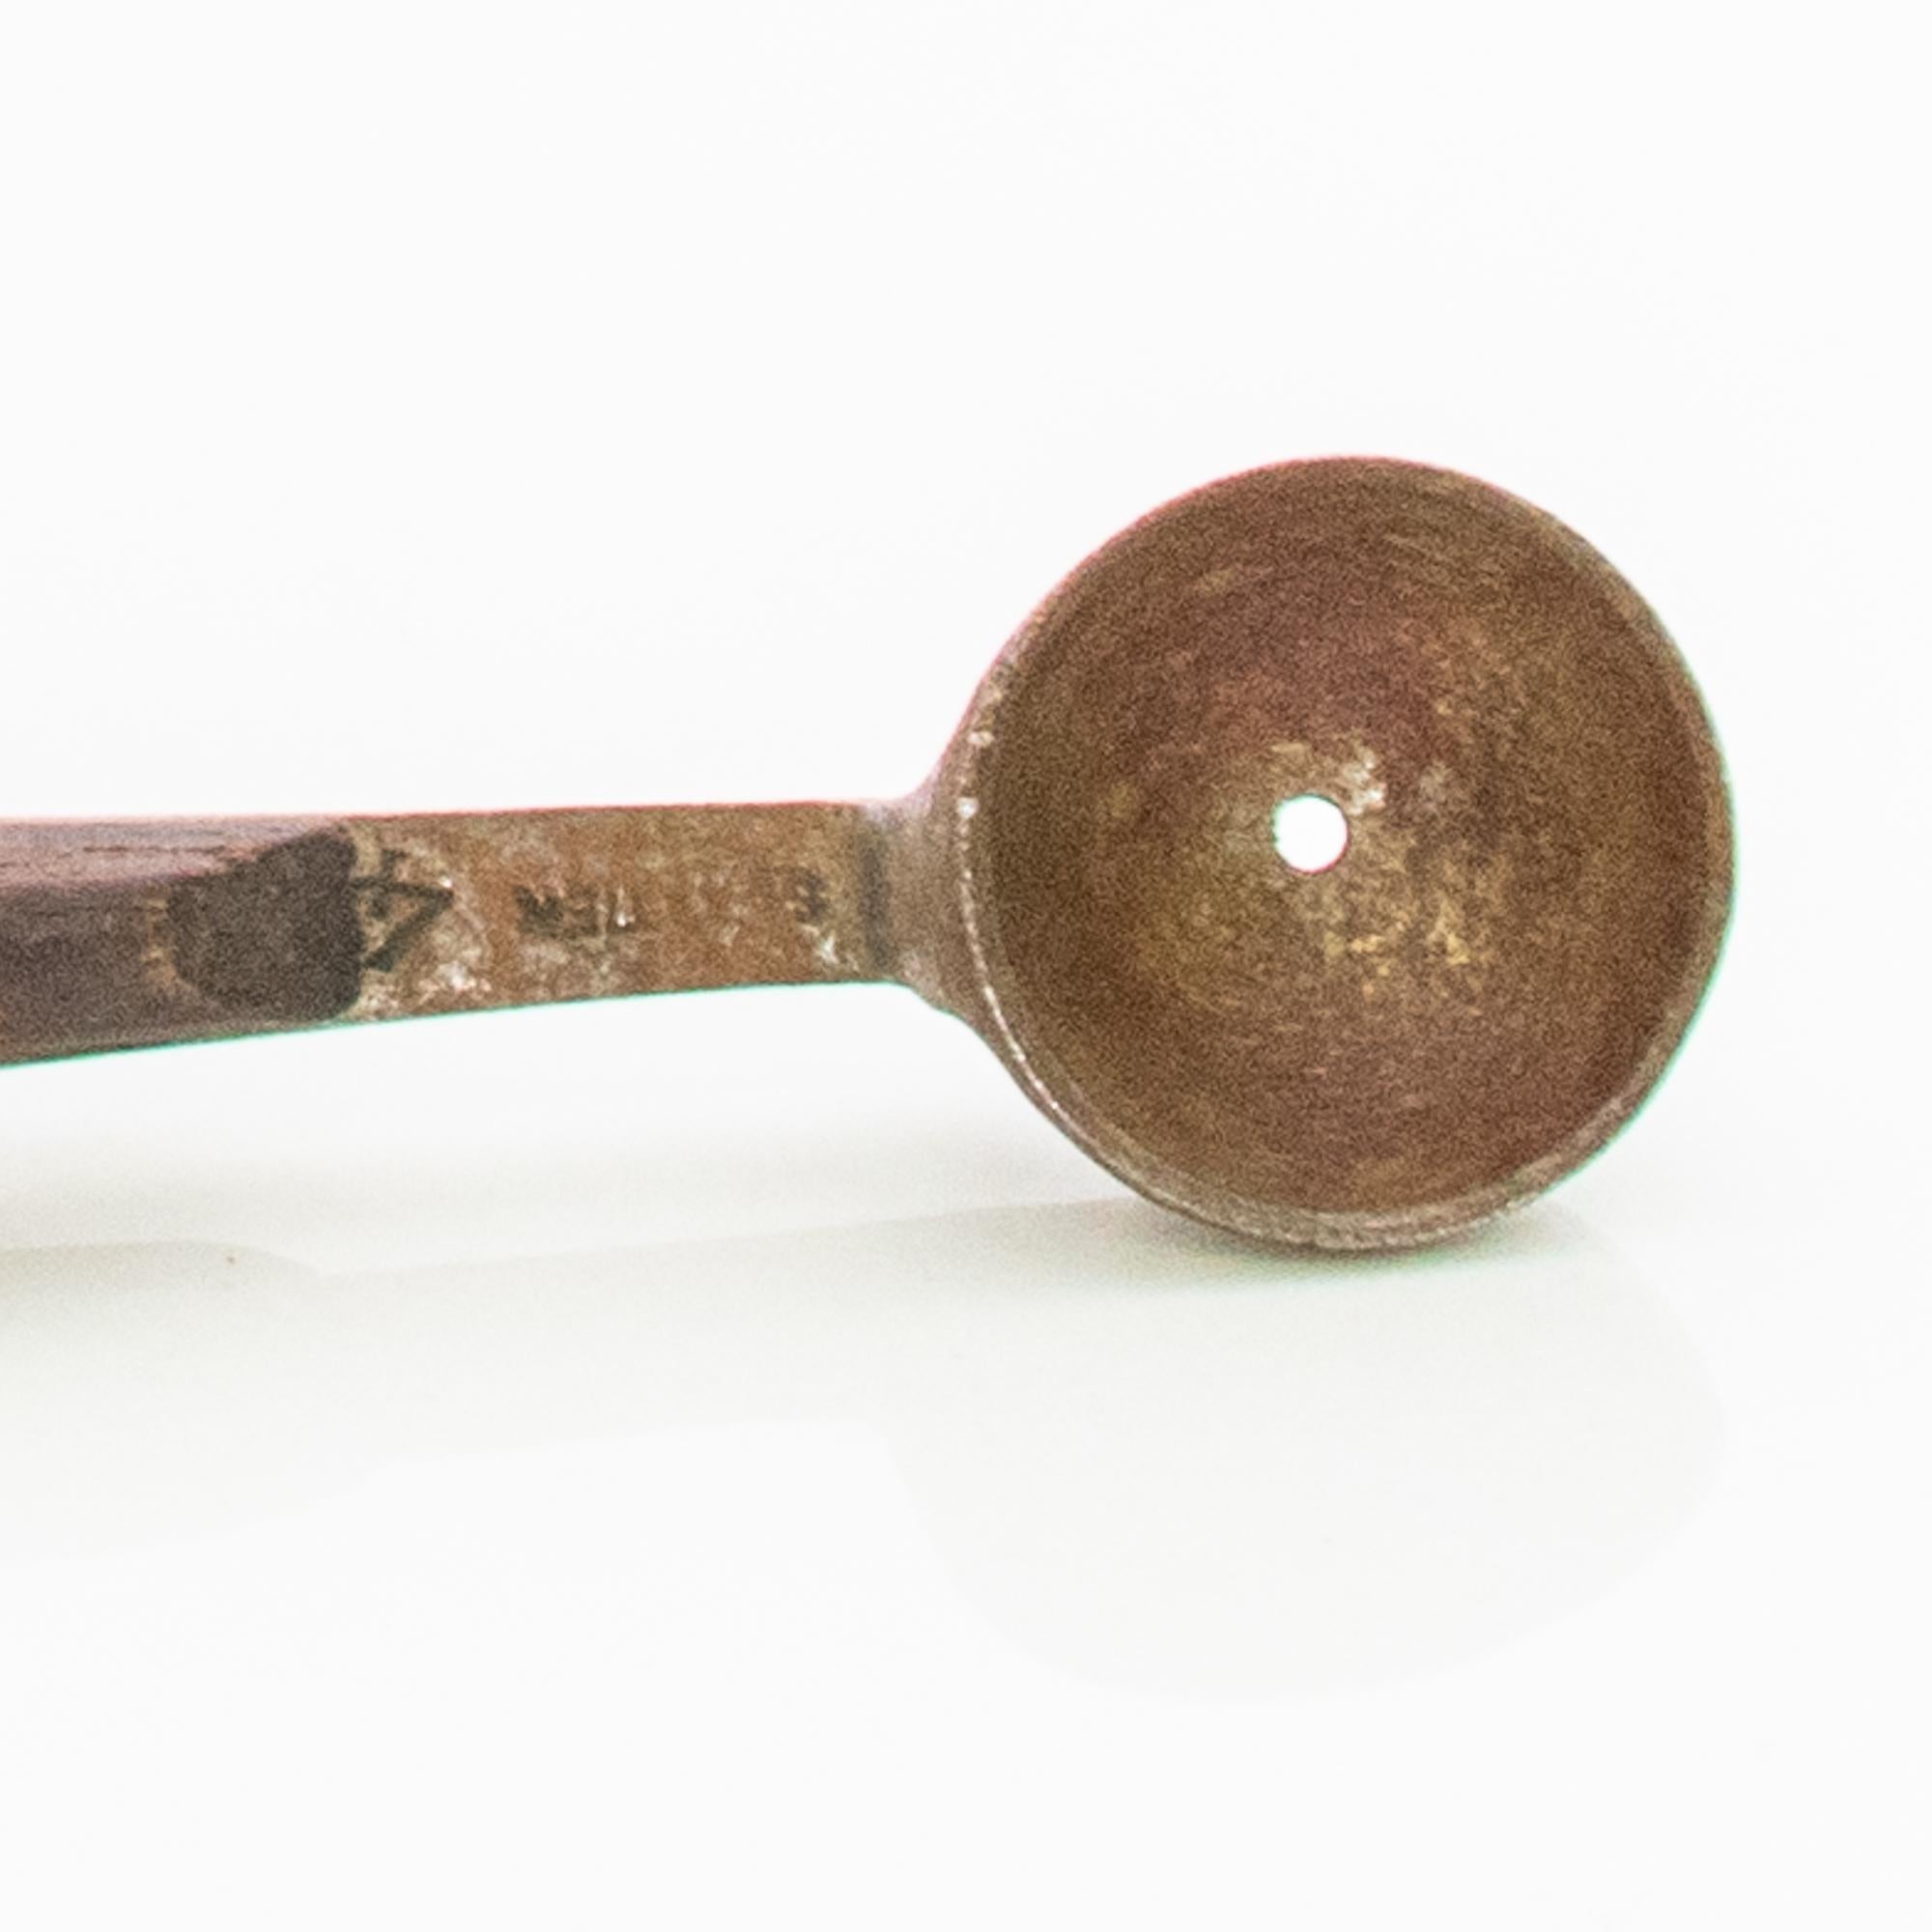 Mid-20th Century Antique Melon Baller Scoop Lovely Rosewood Handle made in FRANCE Sabatier 